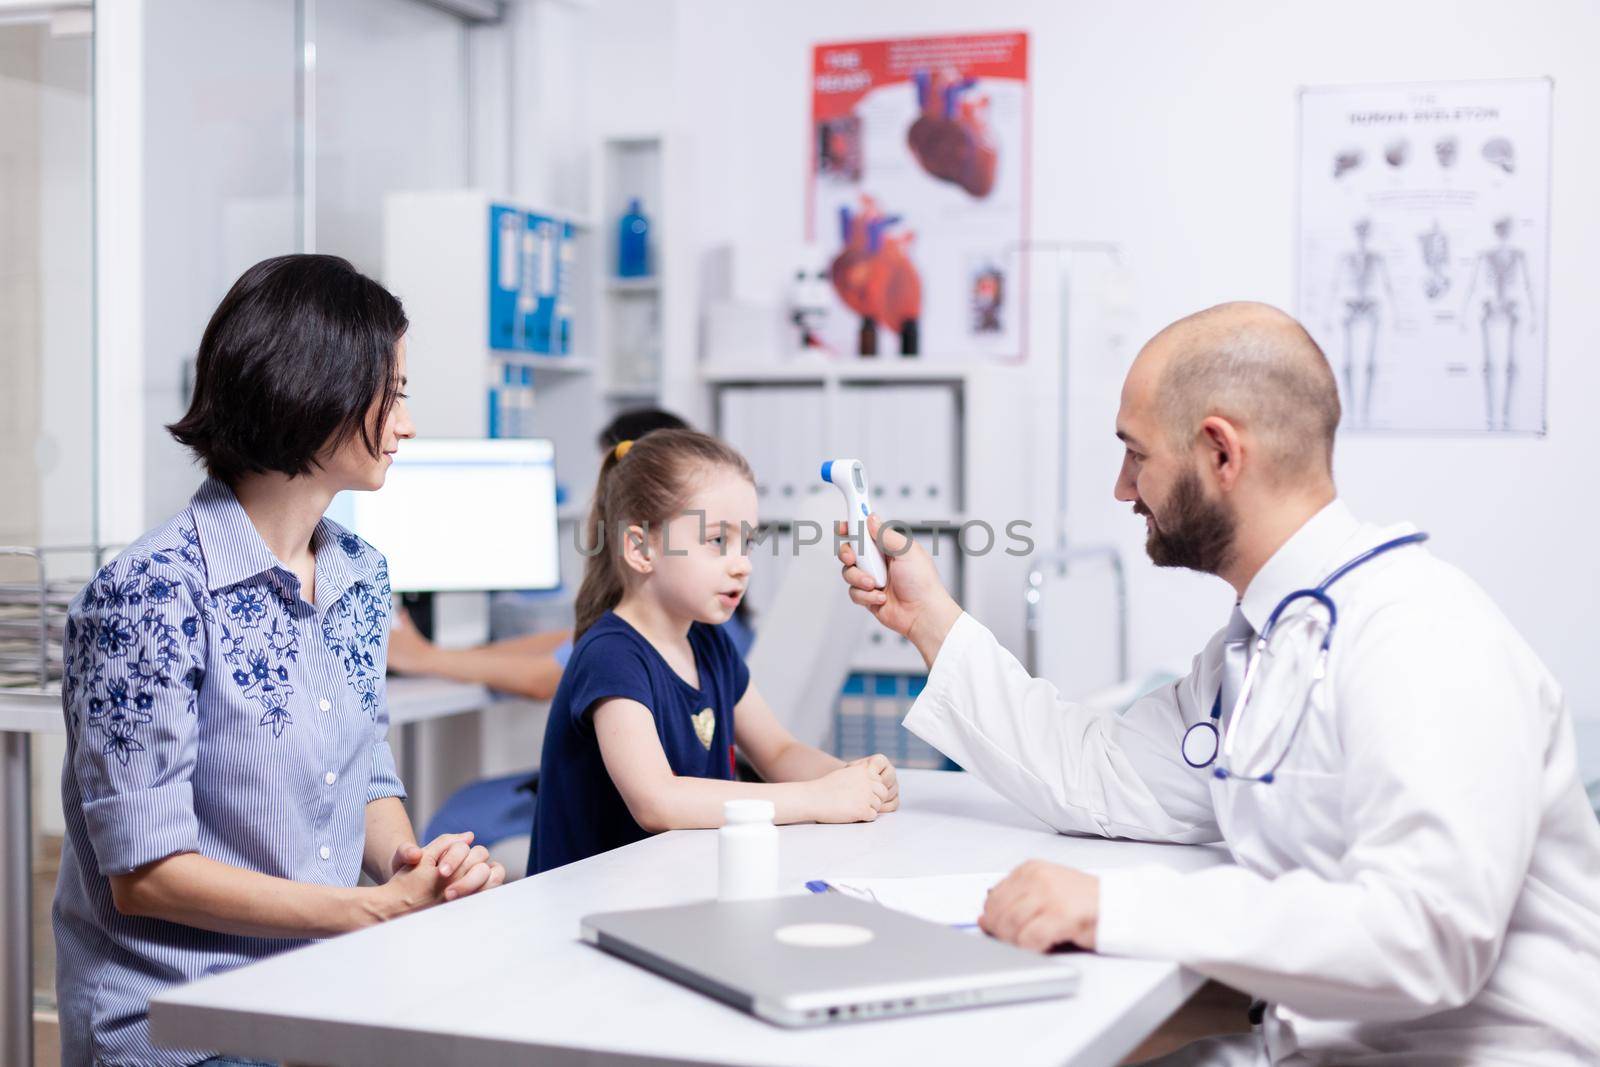 Pediatrician checking child temperature using digital thermometer in medical office. Healthcare physician specialist in medicine providing health care services treatment examination.